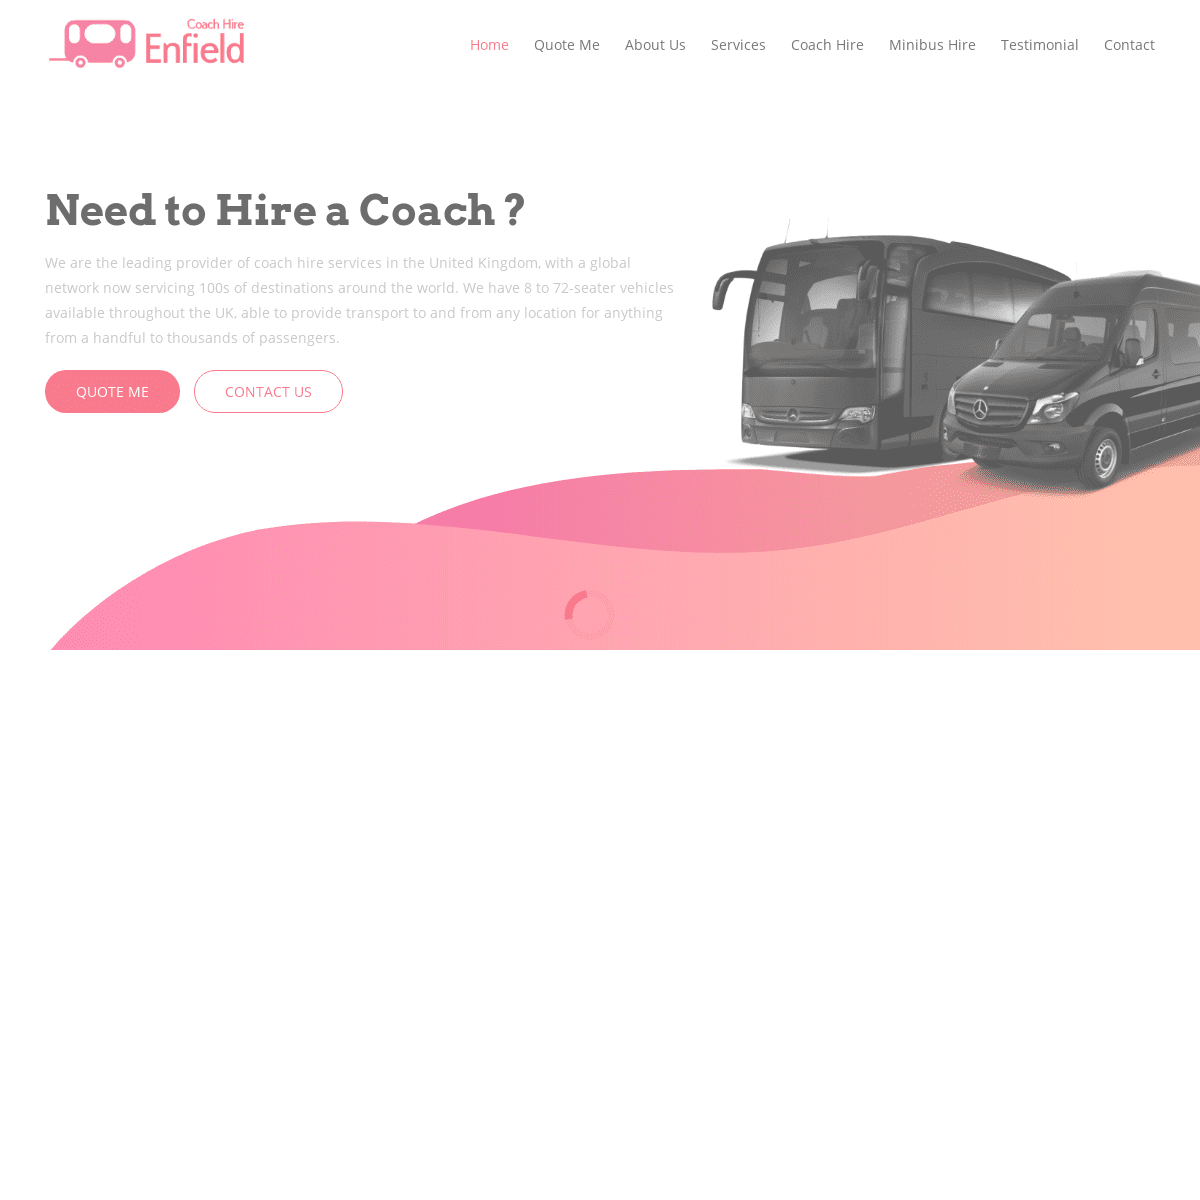 A complete backup of https://coachhireenfield.co.uk